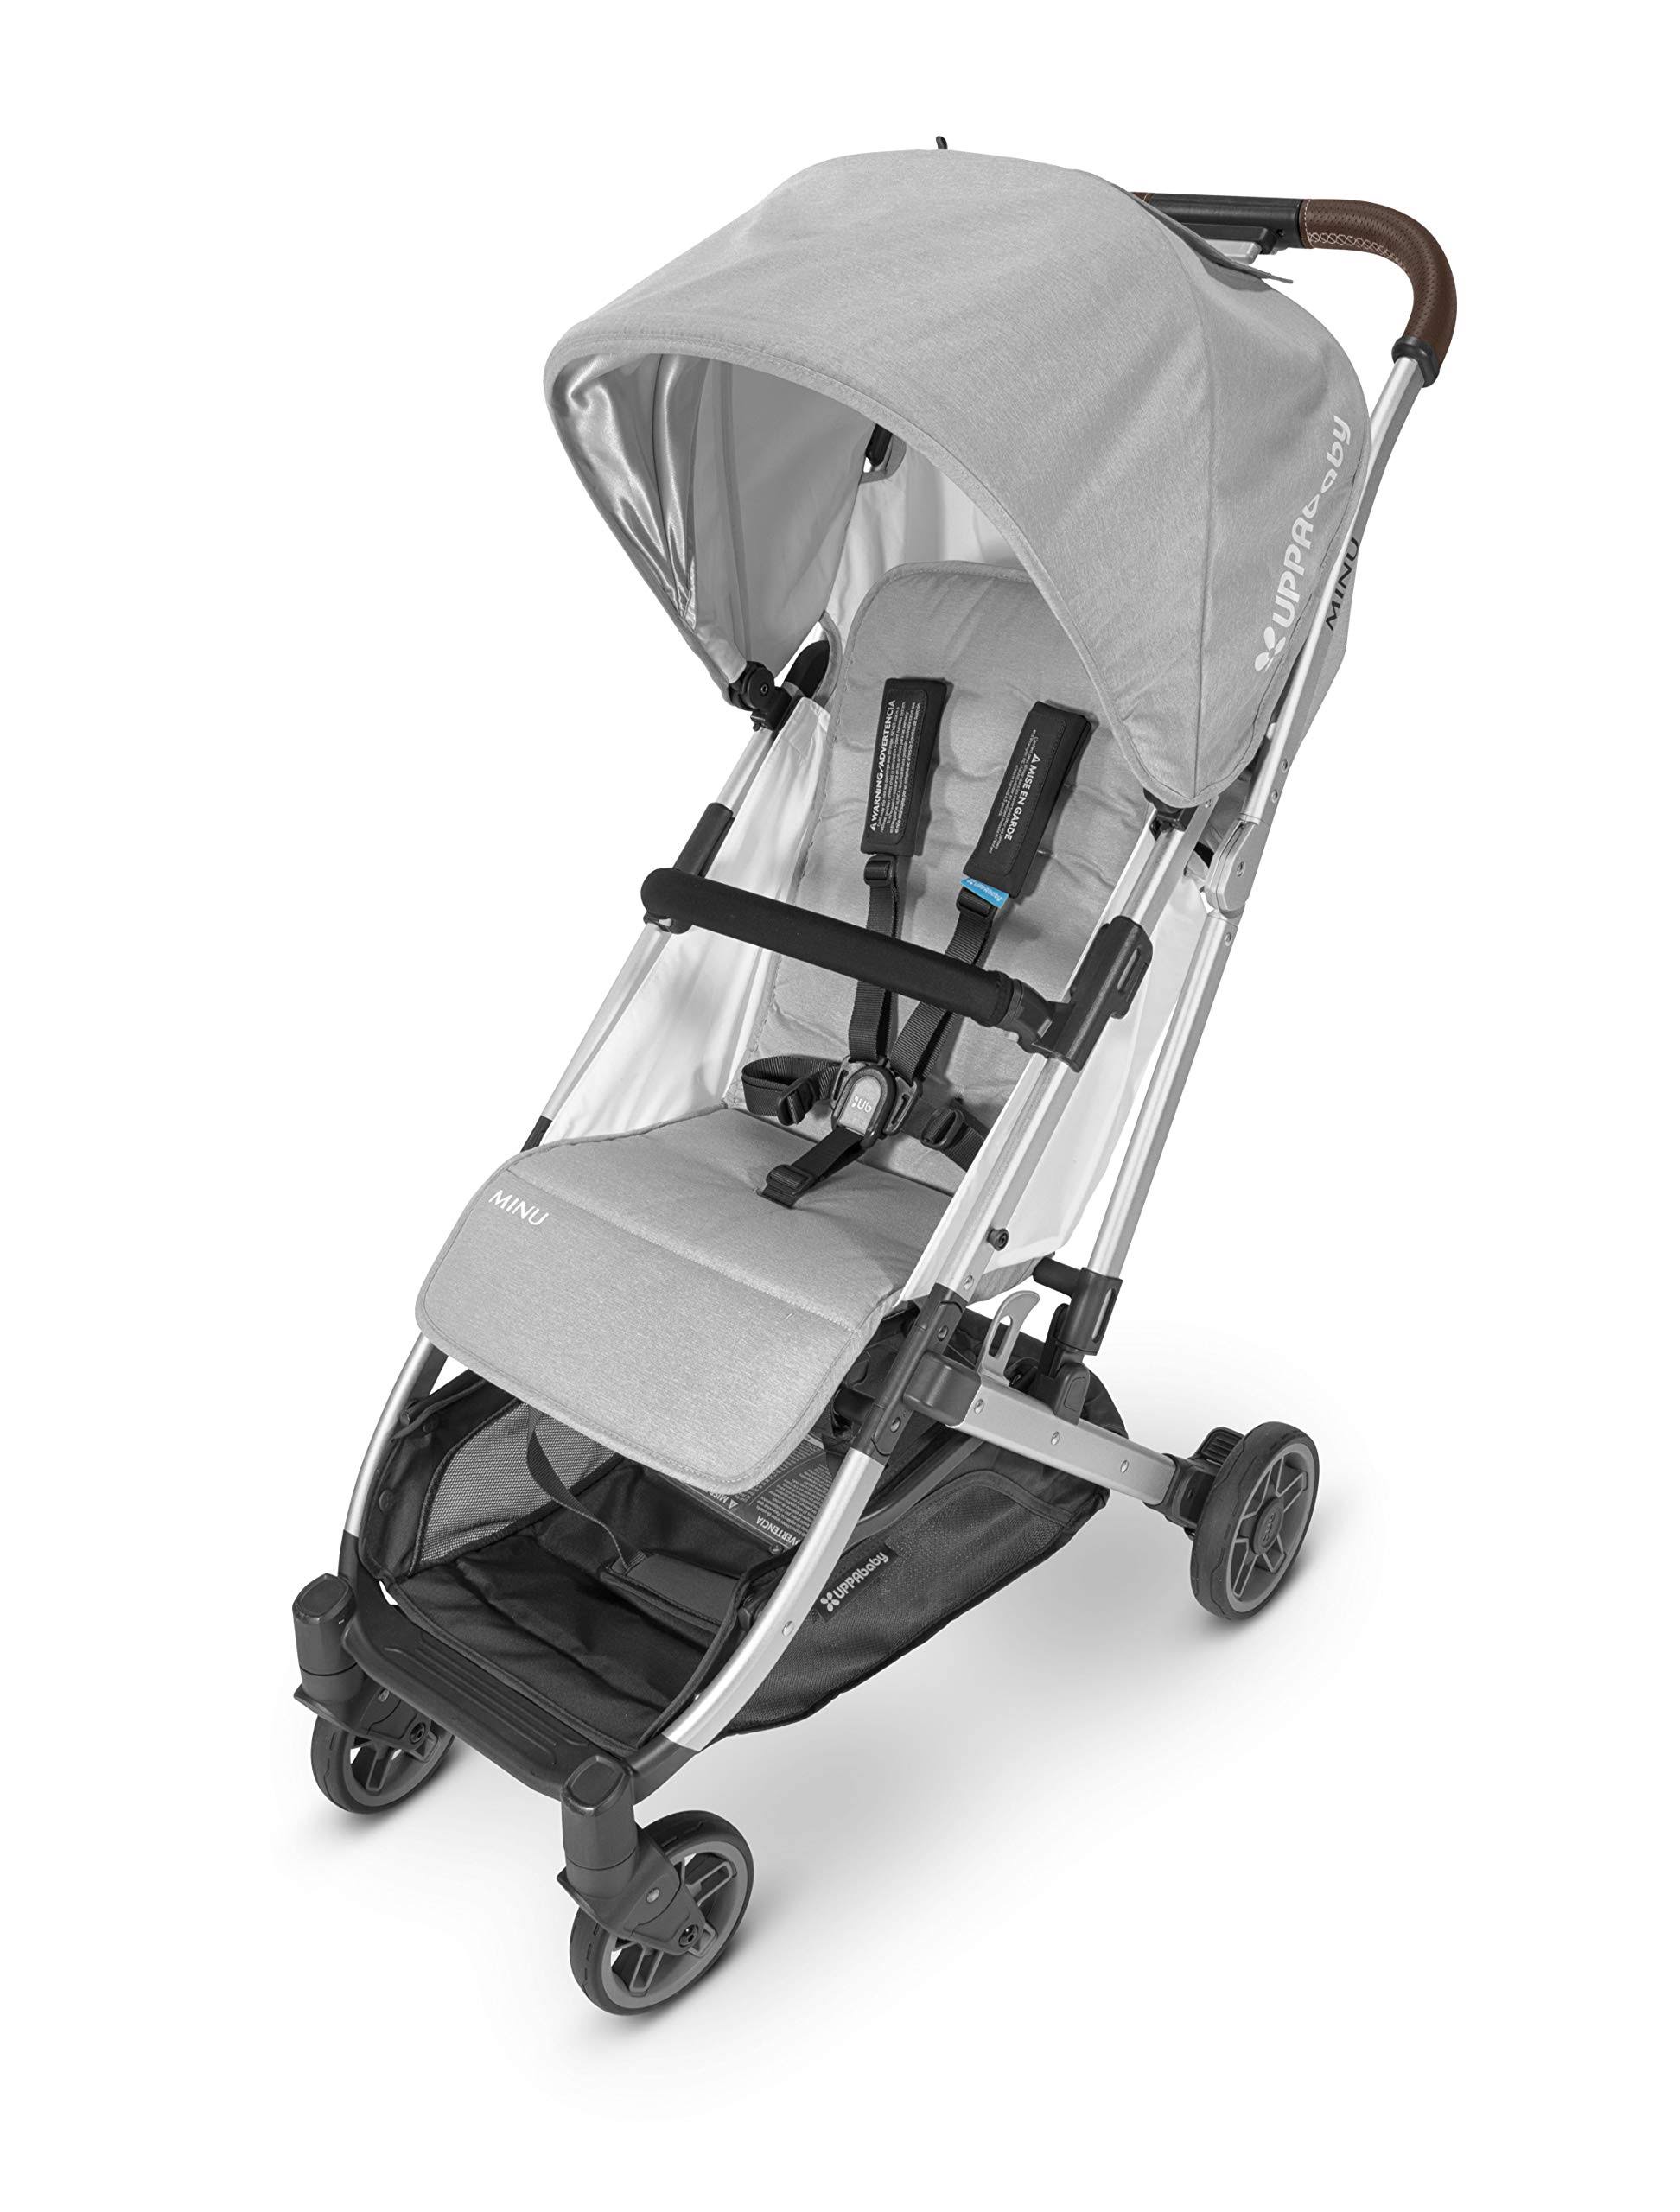 UPPAbaby MINU front bar